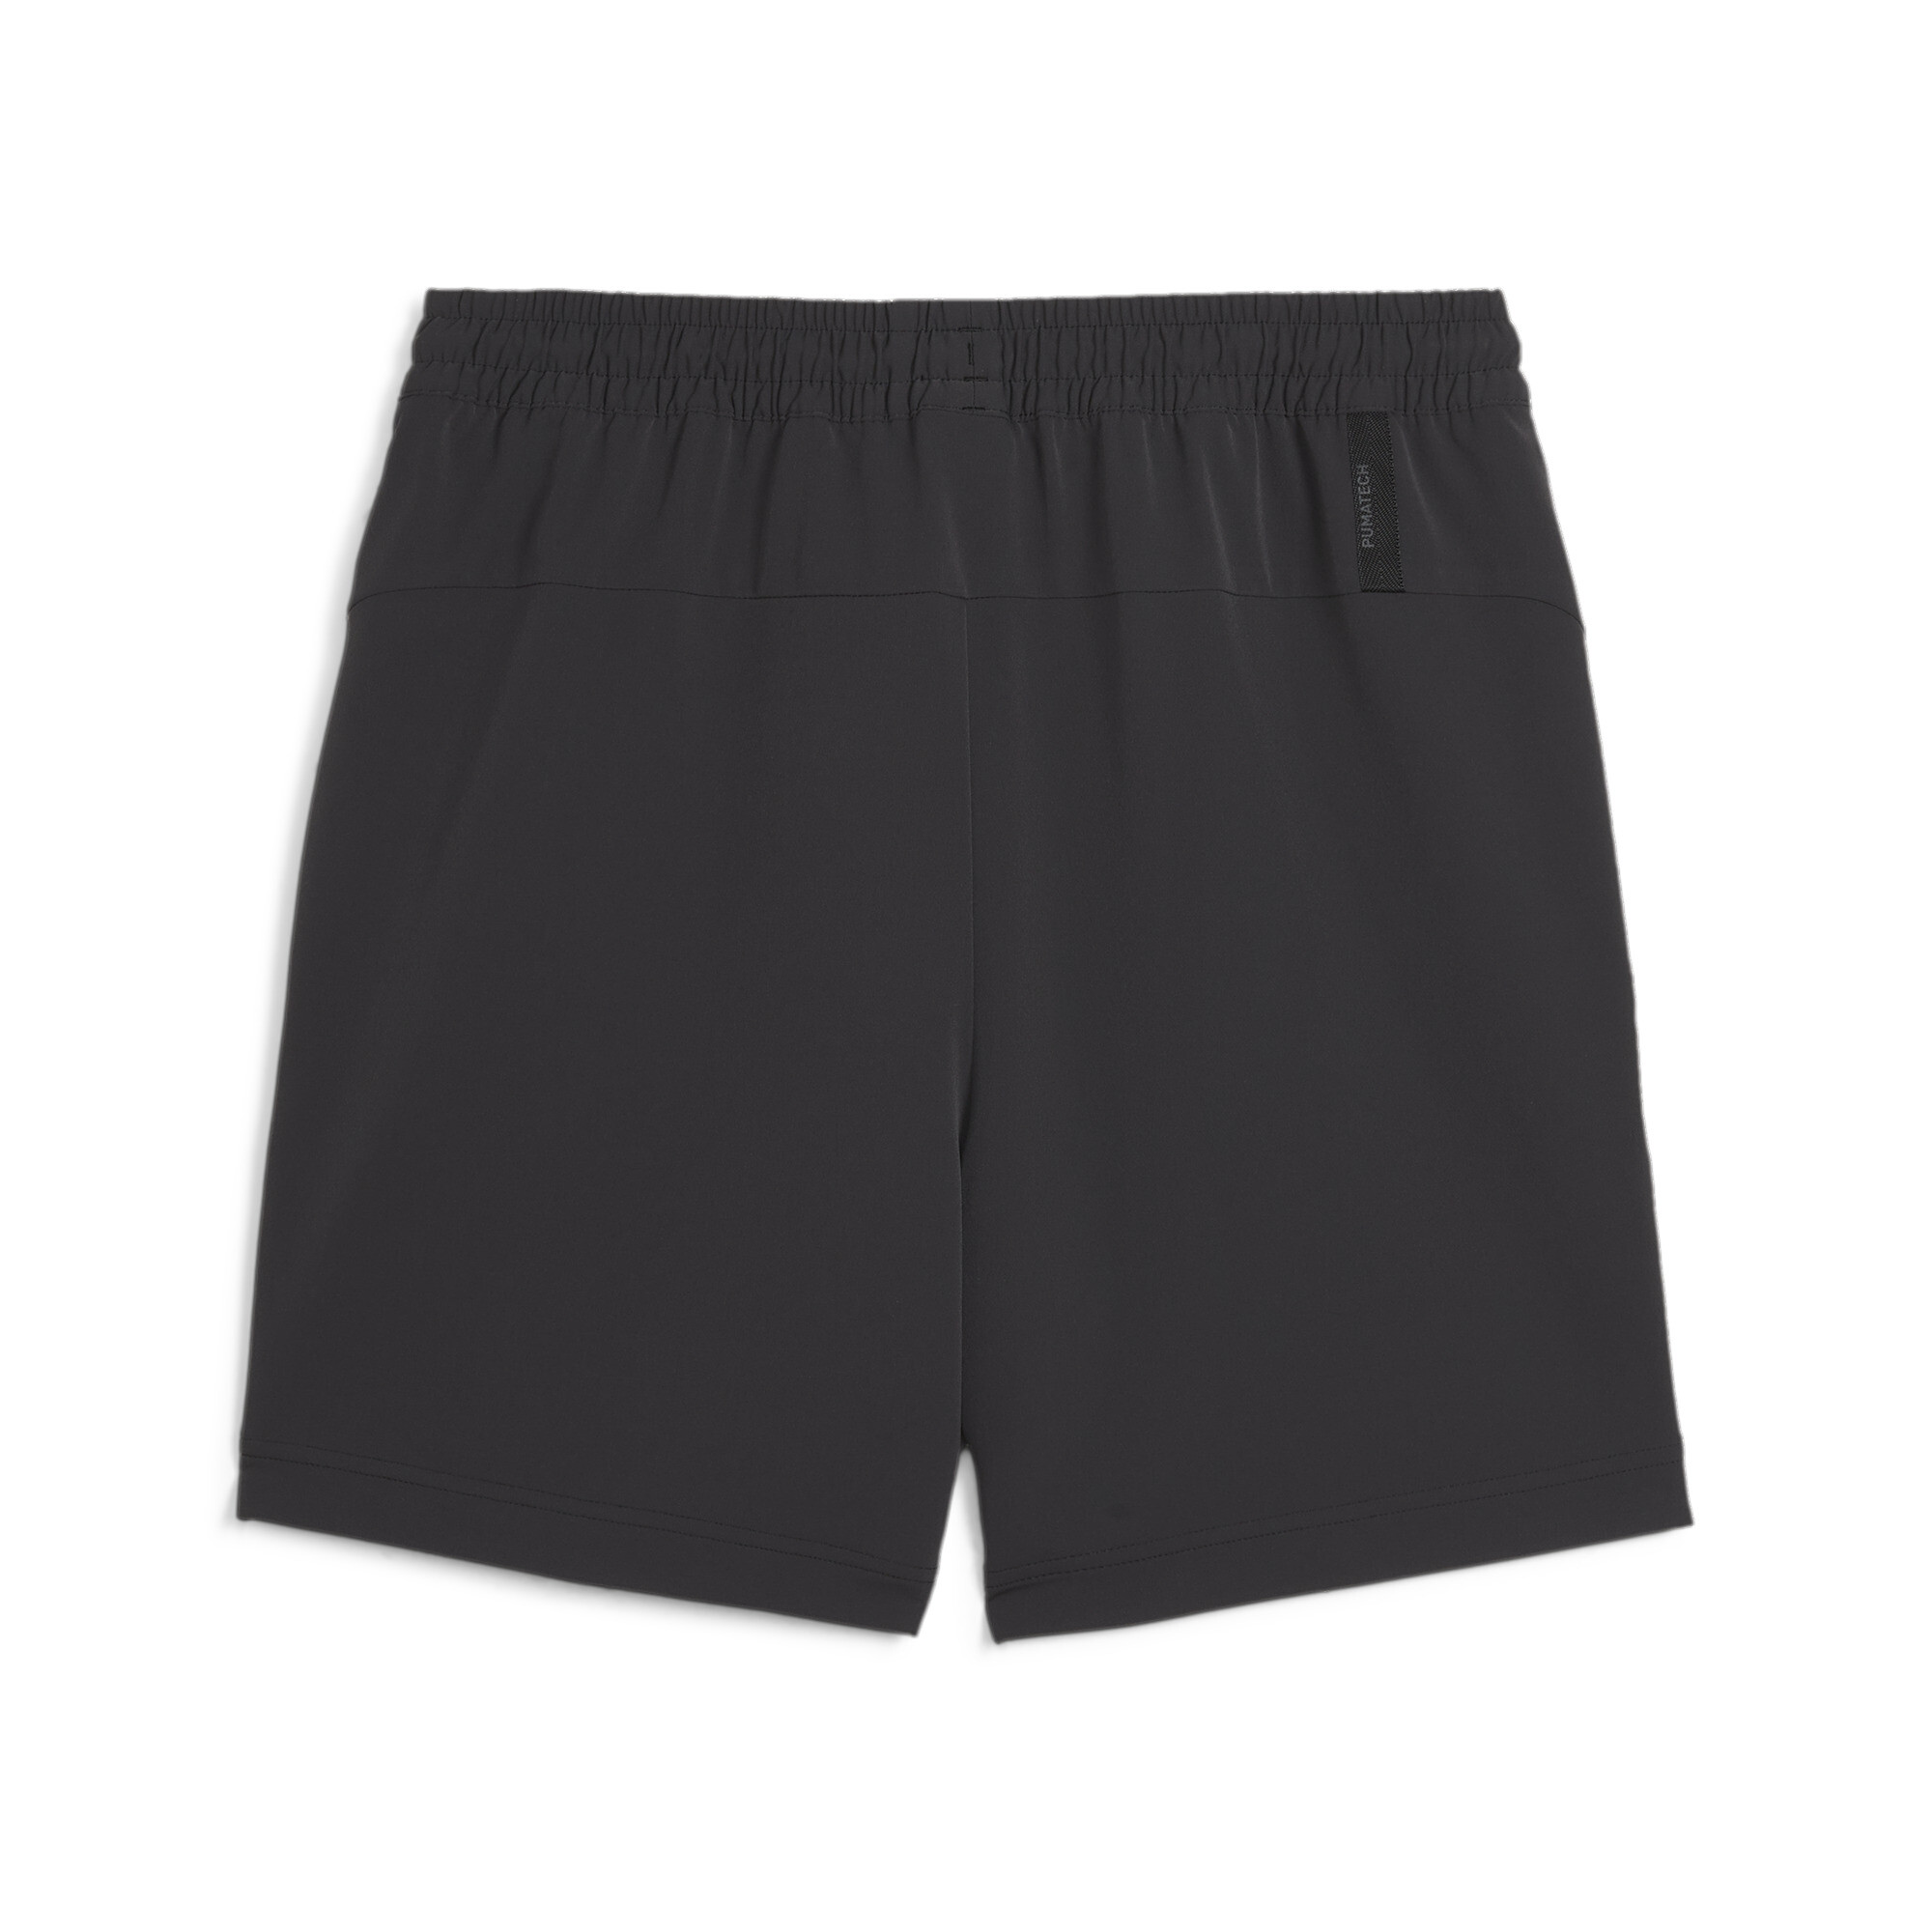 Men's PUMATECH Shorts In 10 - Black, Size Small